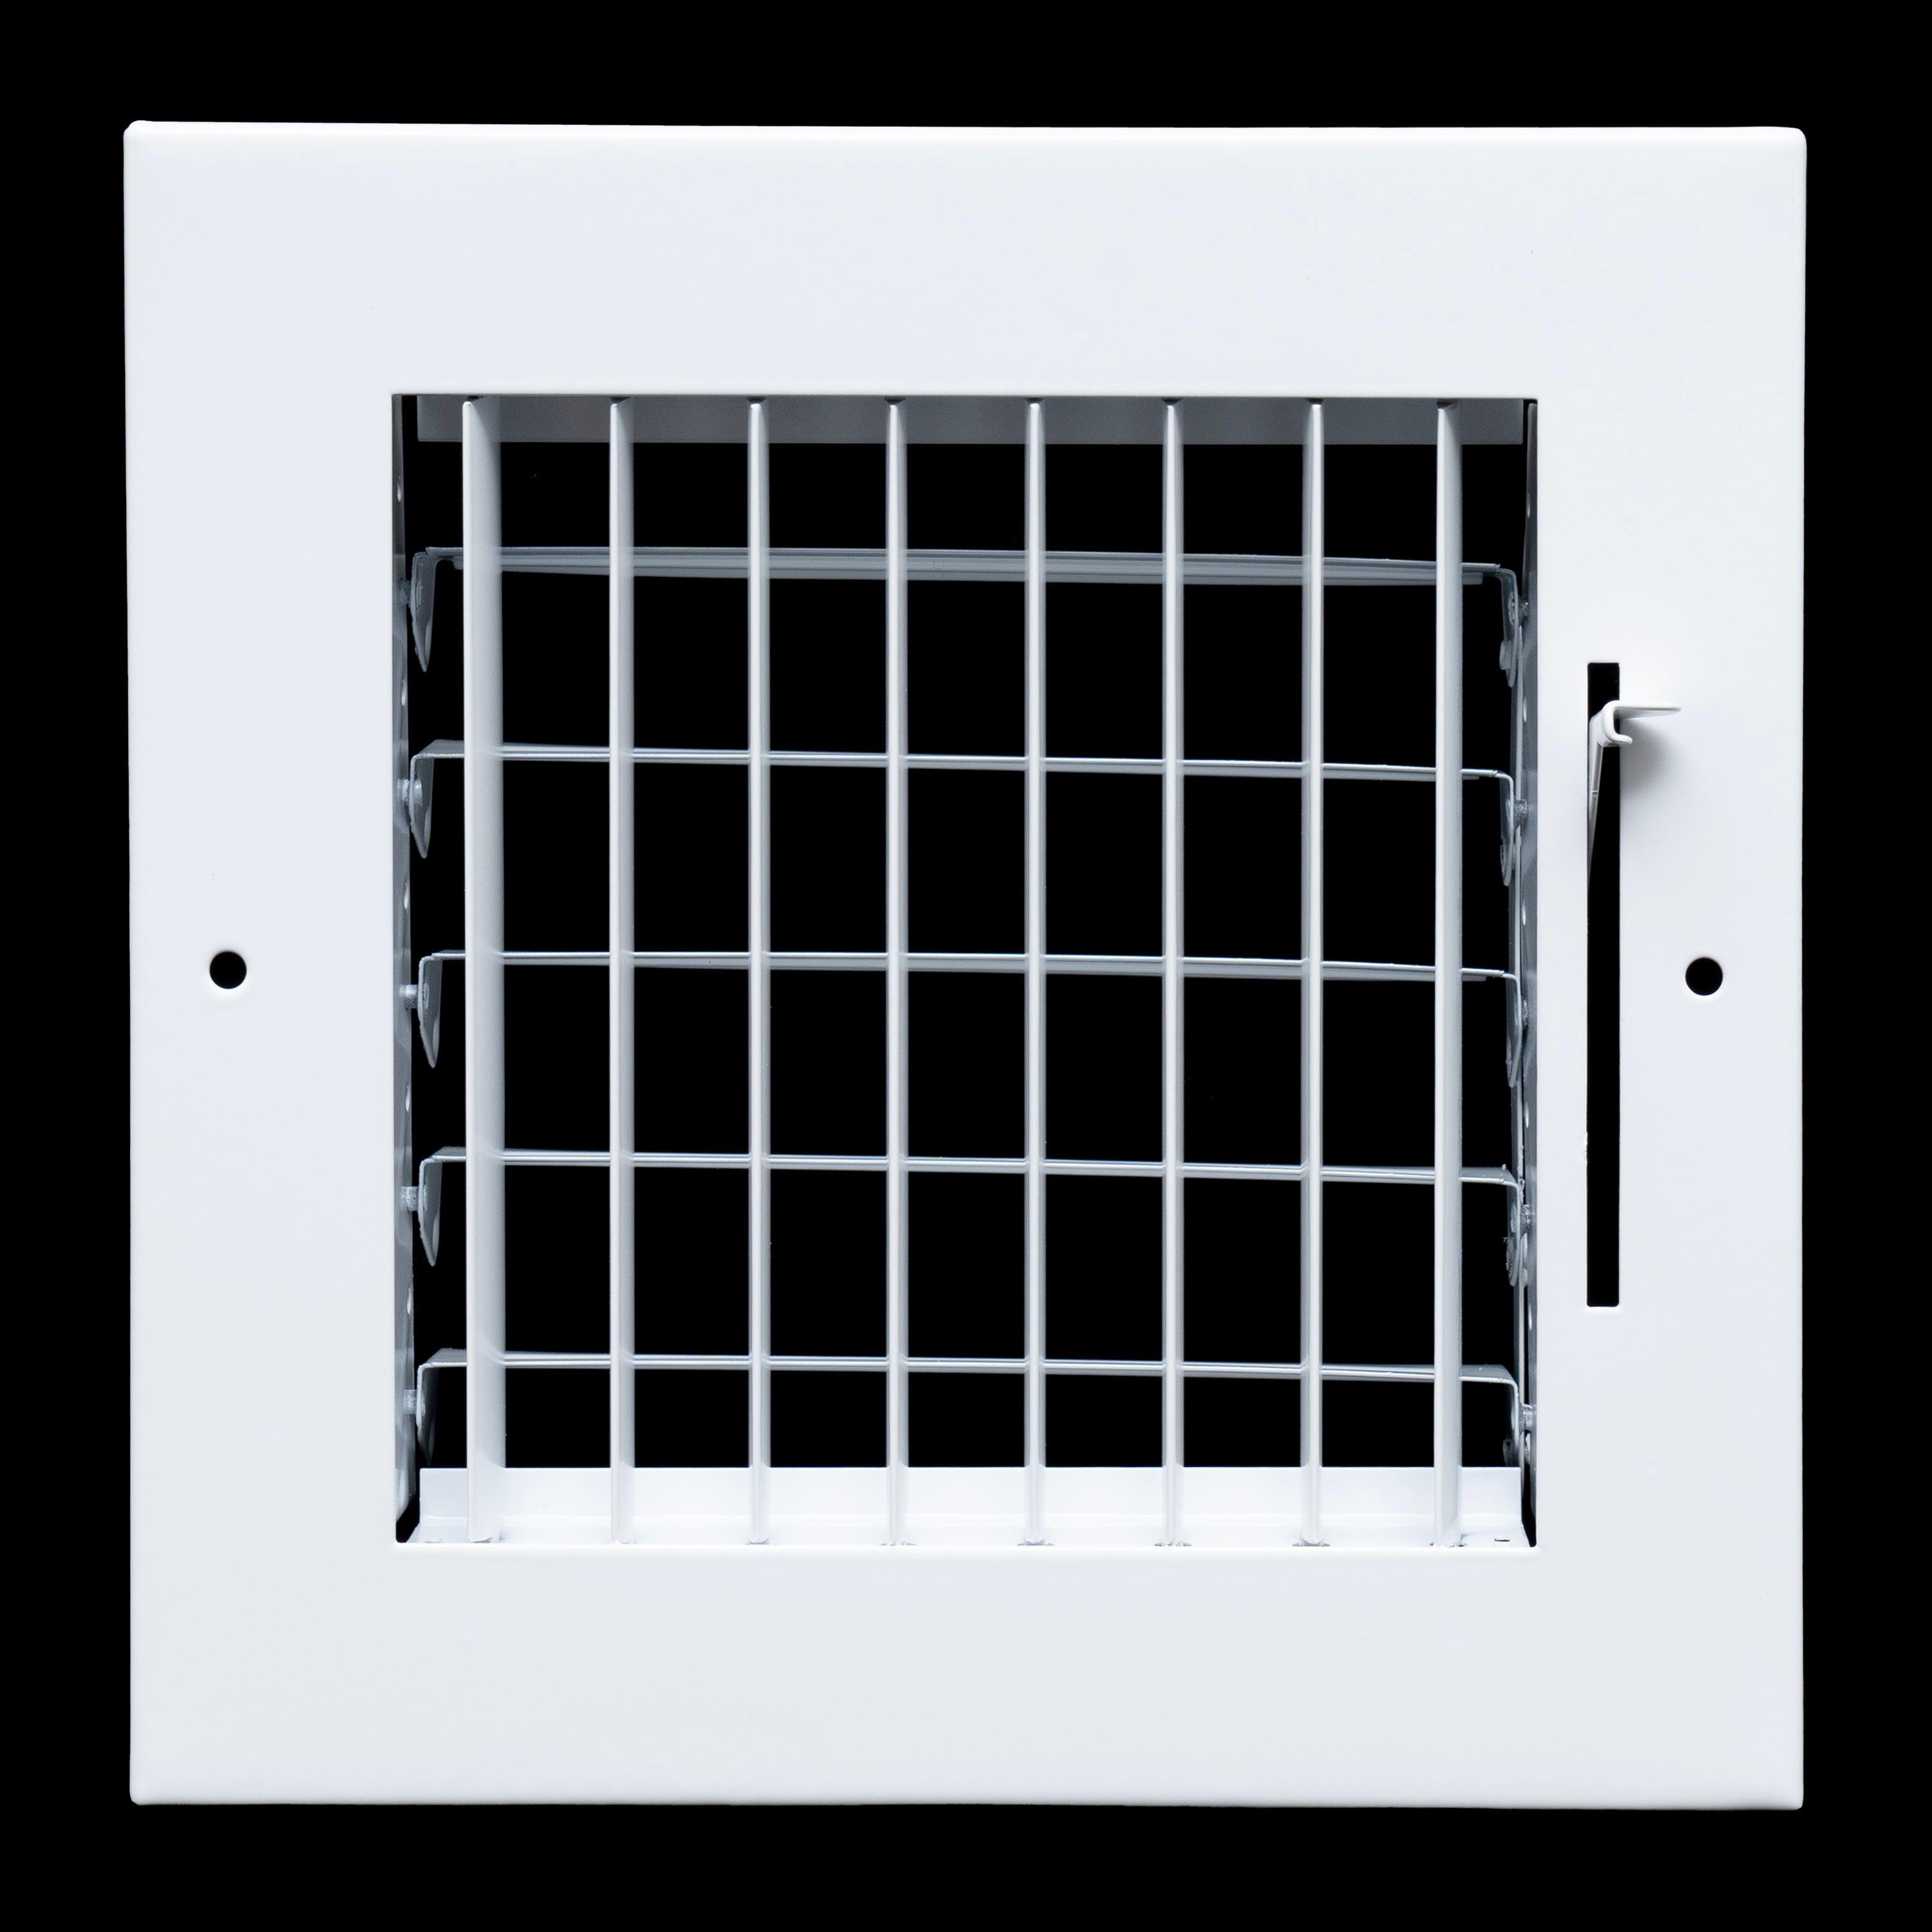 airgrilles 6"w x 6"h steel adjustable air supply grille register vent cover grill for sidewall and ceiling white outer dimensions: 7.75"w x 7.75"h for 6x6 duct opening hnd-adj-wh-6x6-v1